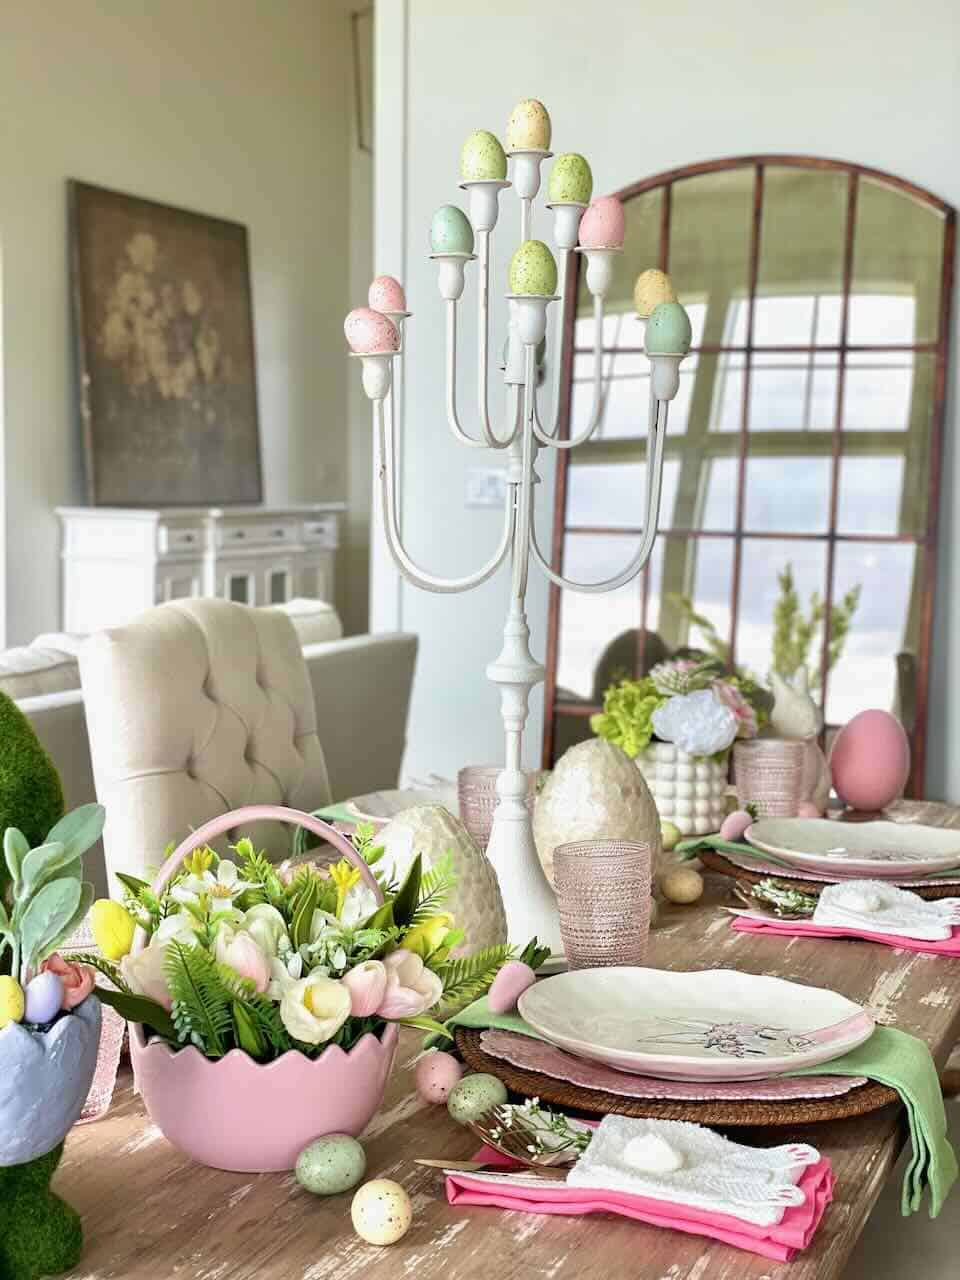 Decorating an Easter Table